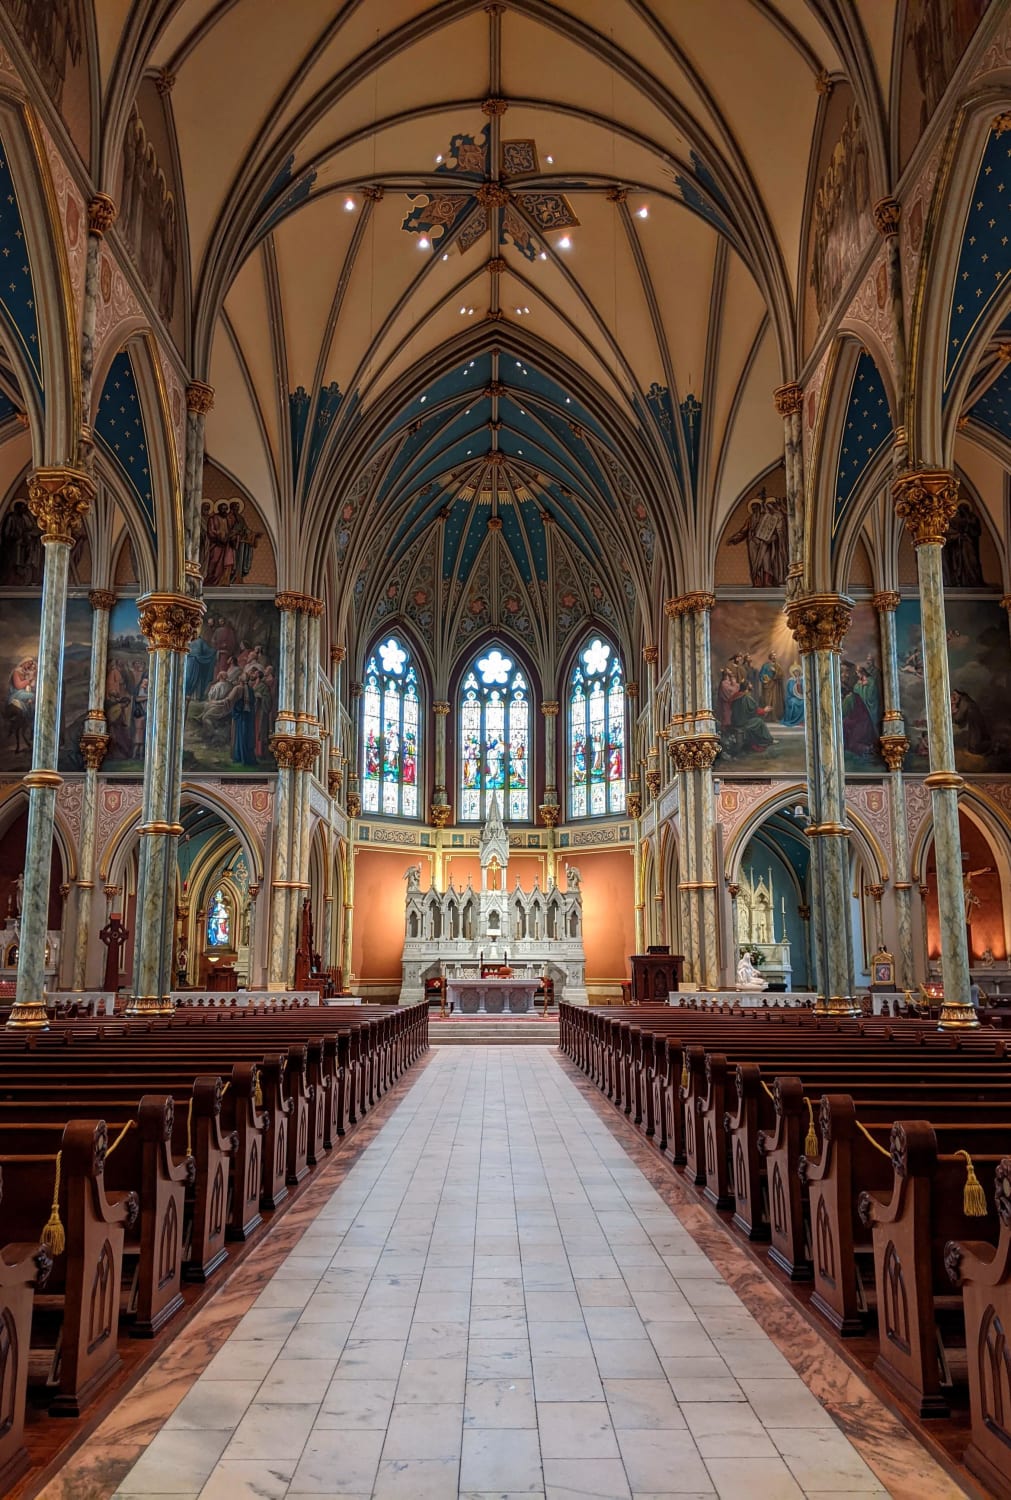 Interior of The Cathedral Basilica of St. John the Baptist in Savannah, Georgia